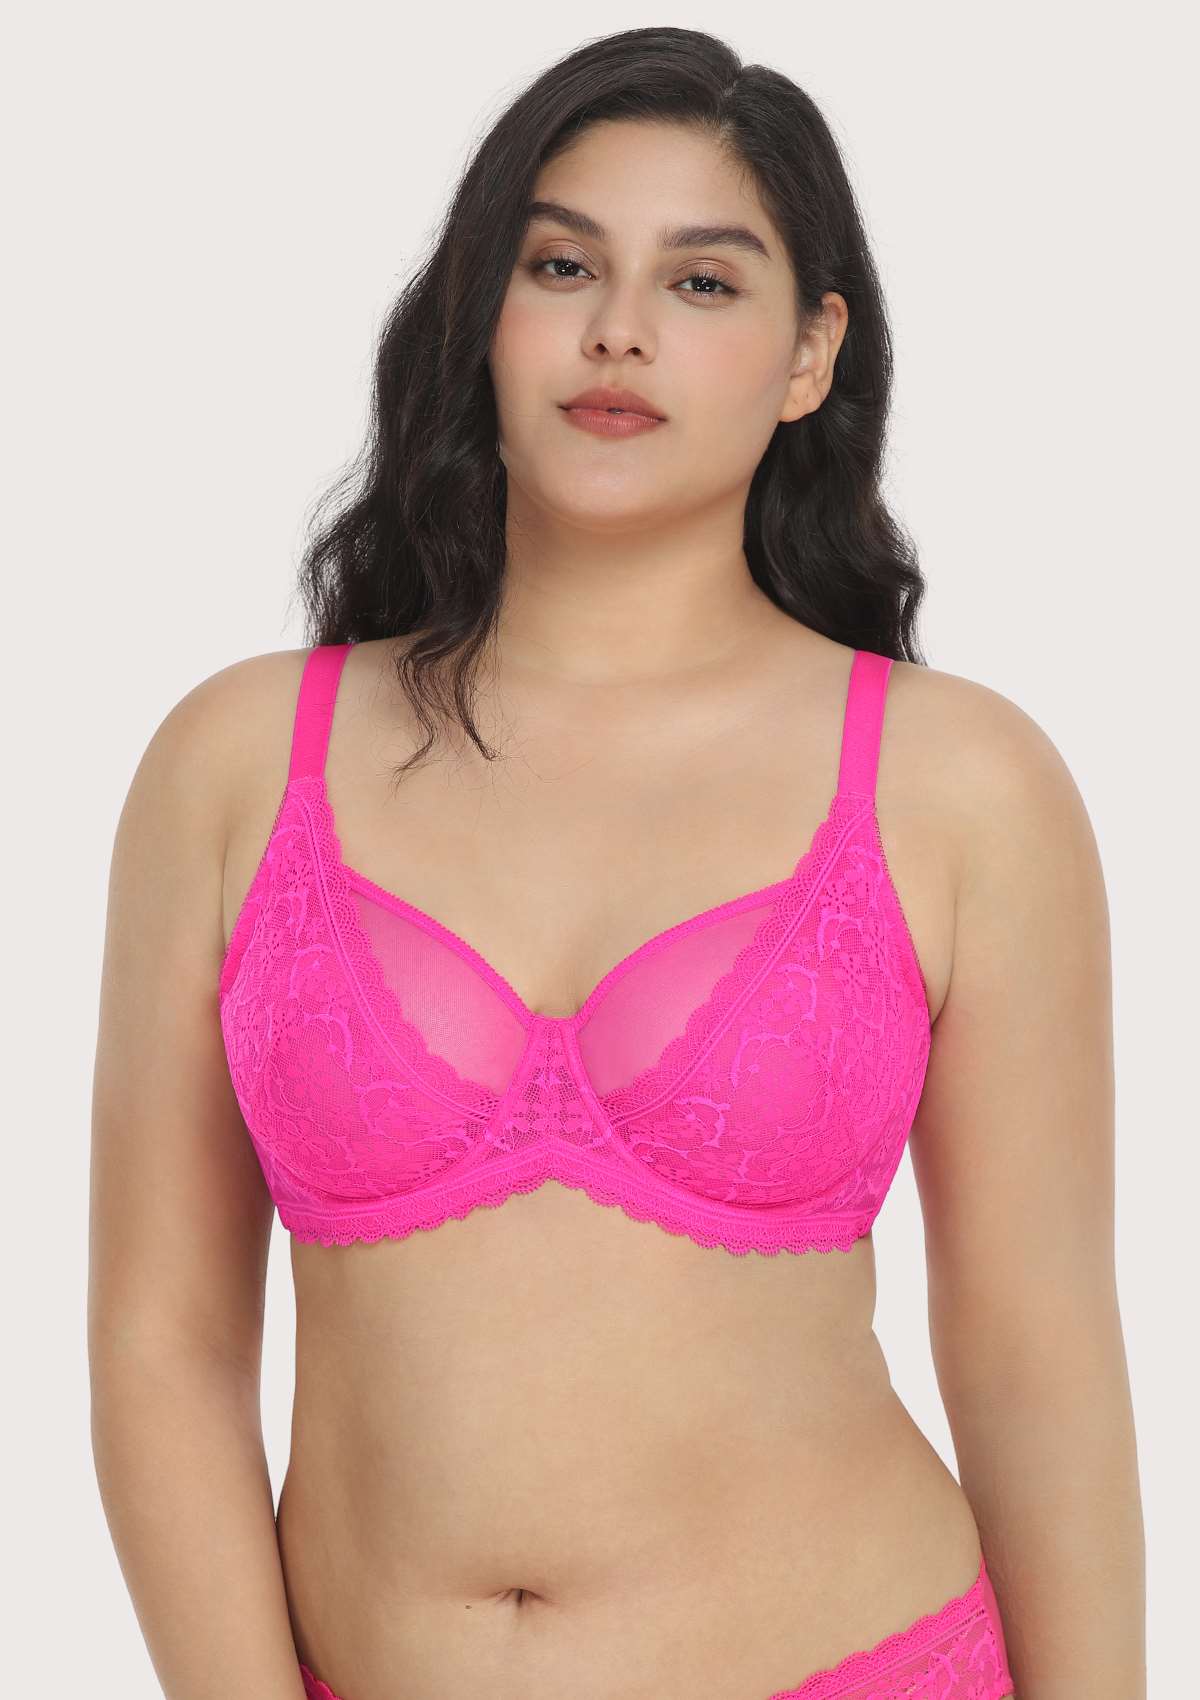 HSIA Anemone Lace Unlined Bra: Supportive, Lightweight Bra - Ginger / 40 / D